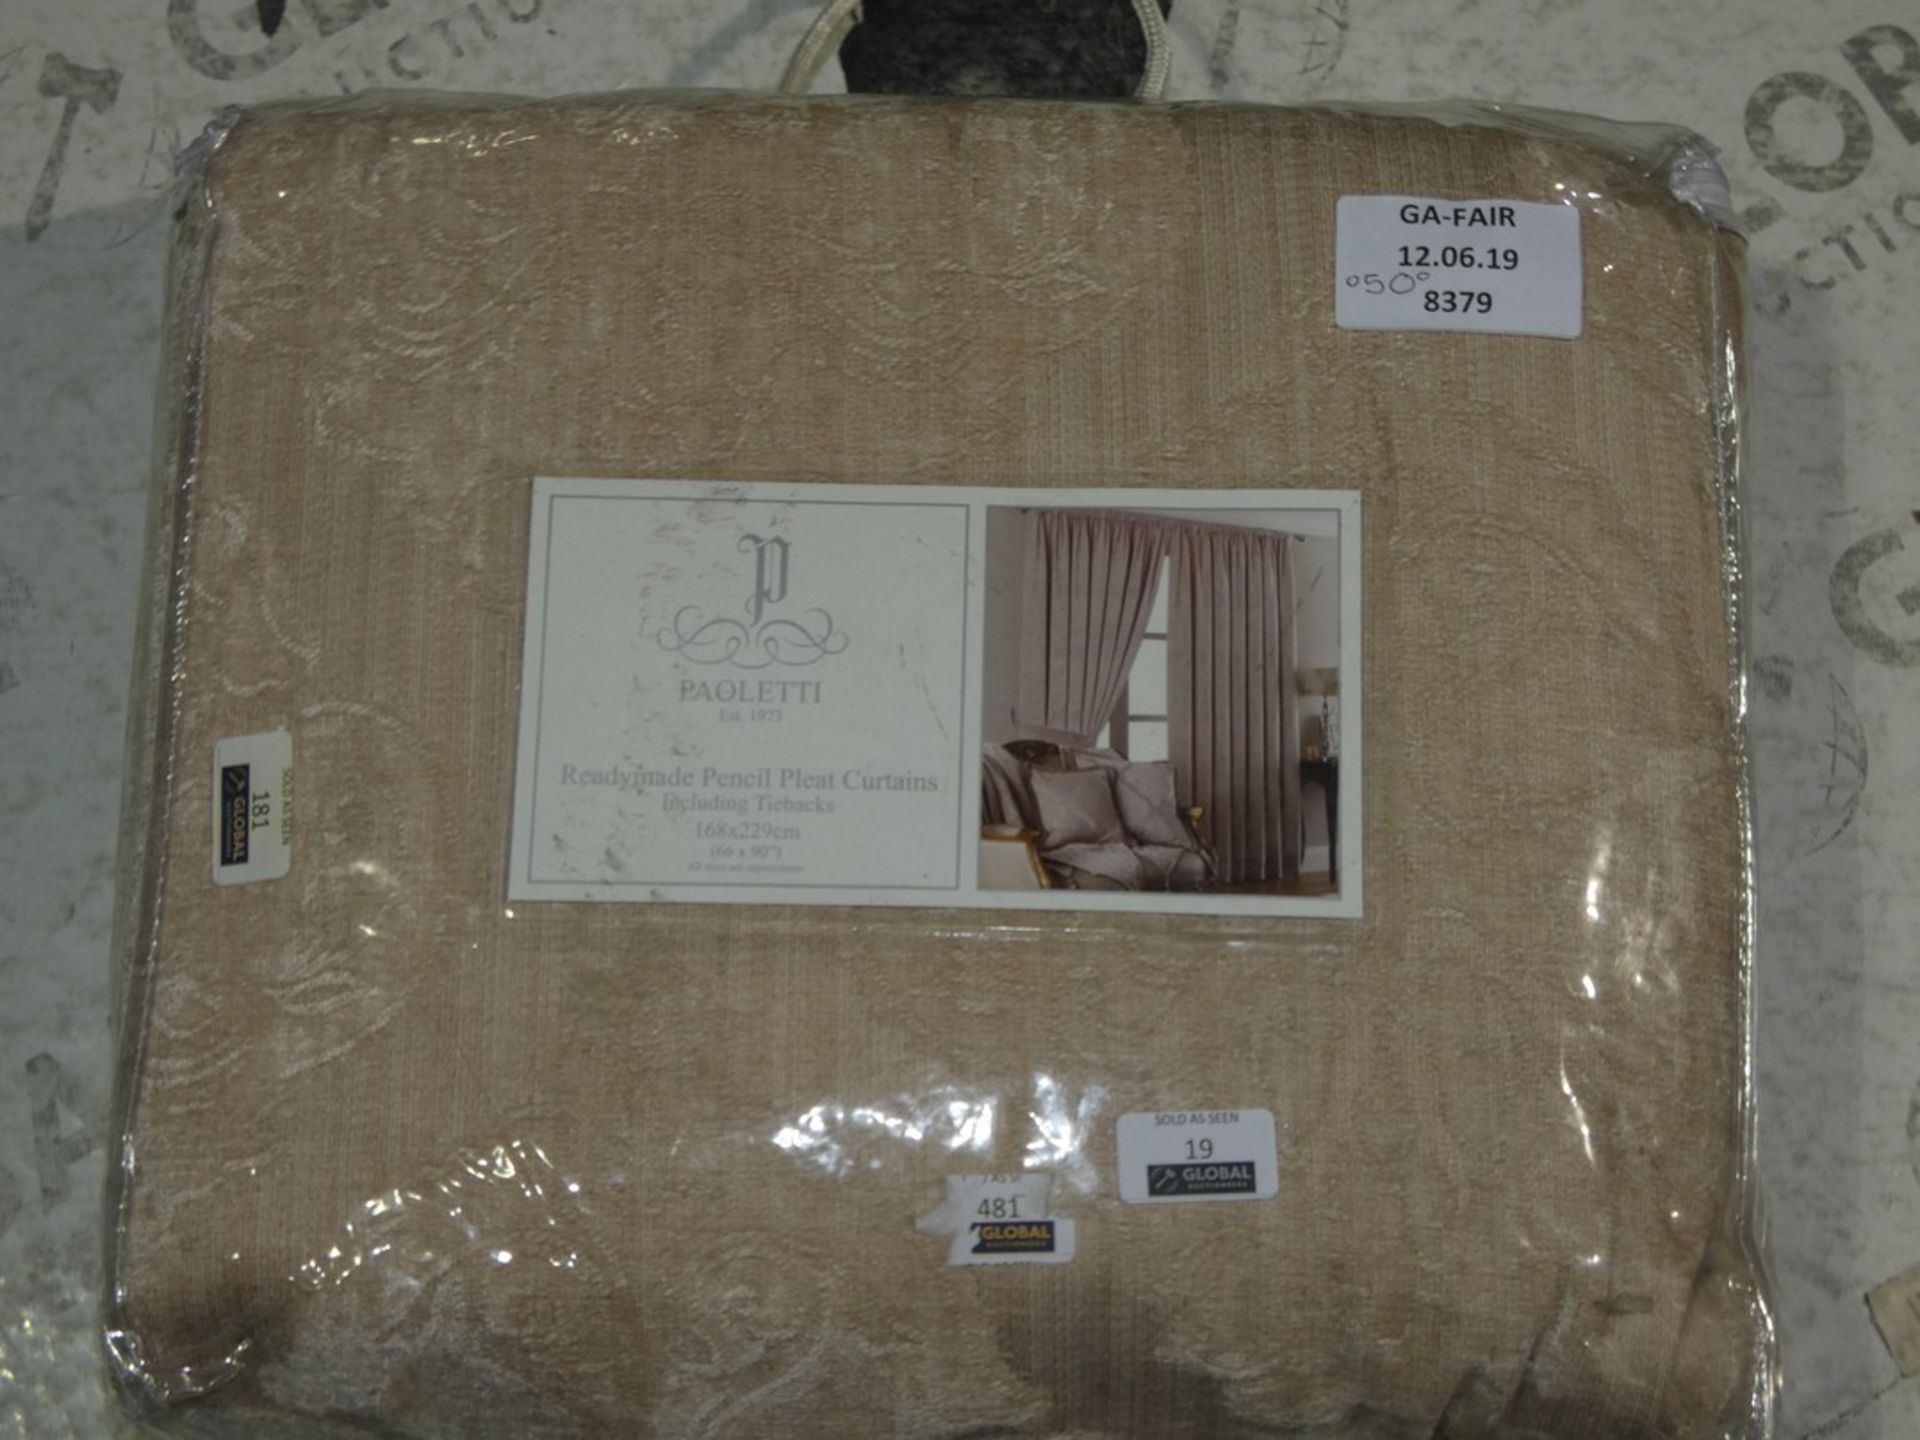 Bagged Pair of Paoletti Ready Made Pencil Pleat Curtains Including TieBacks RRP £50 (8379) (